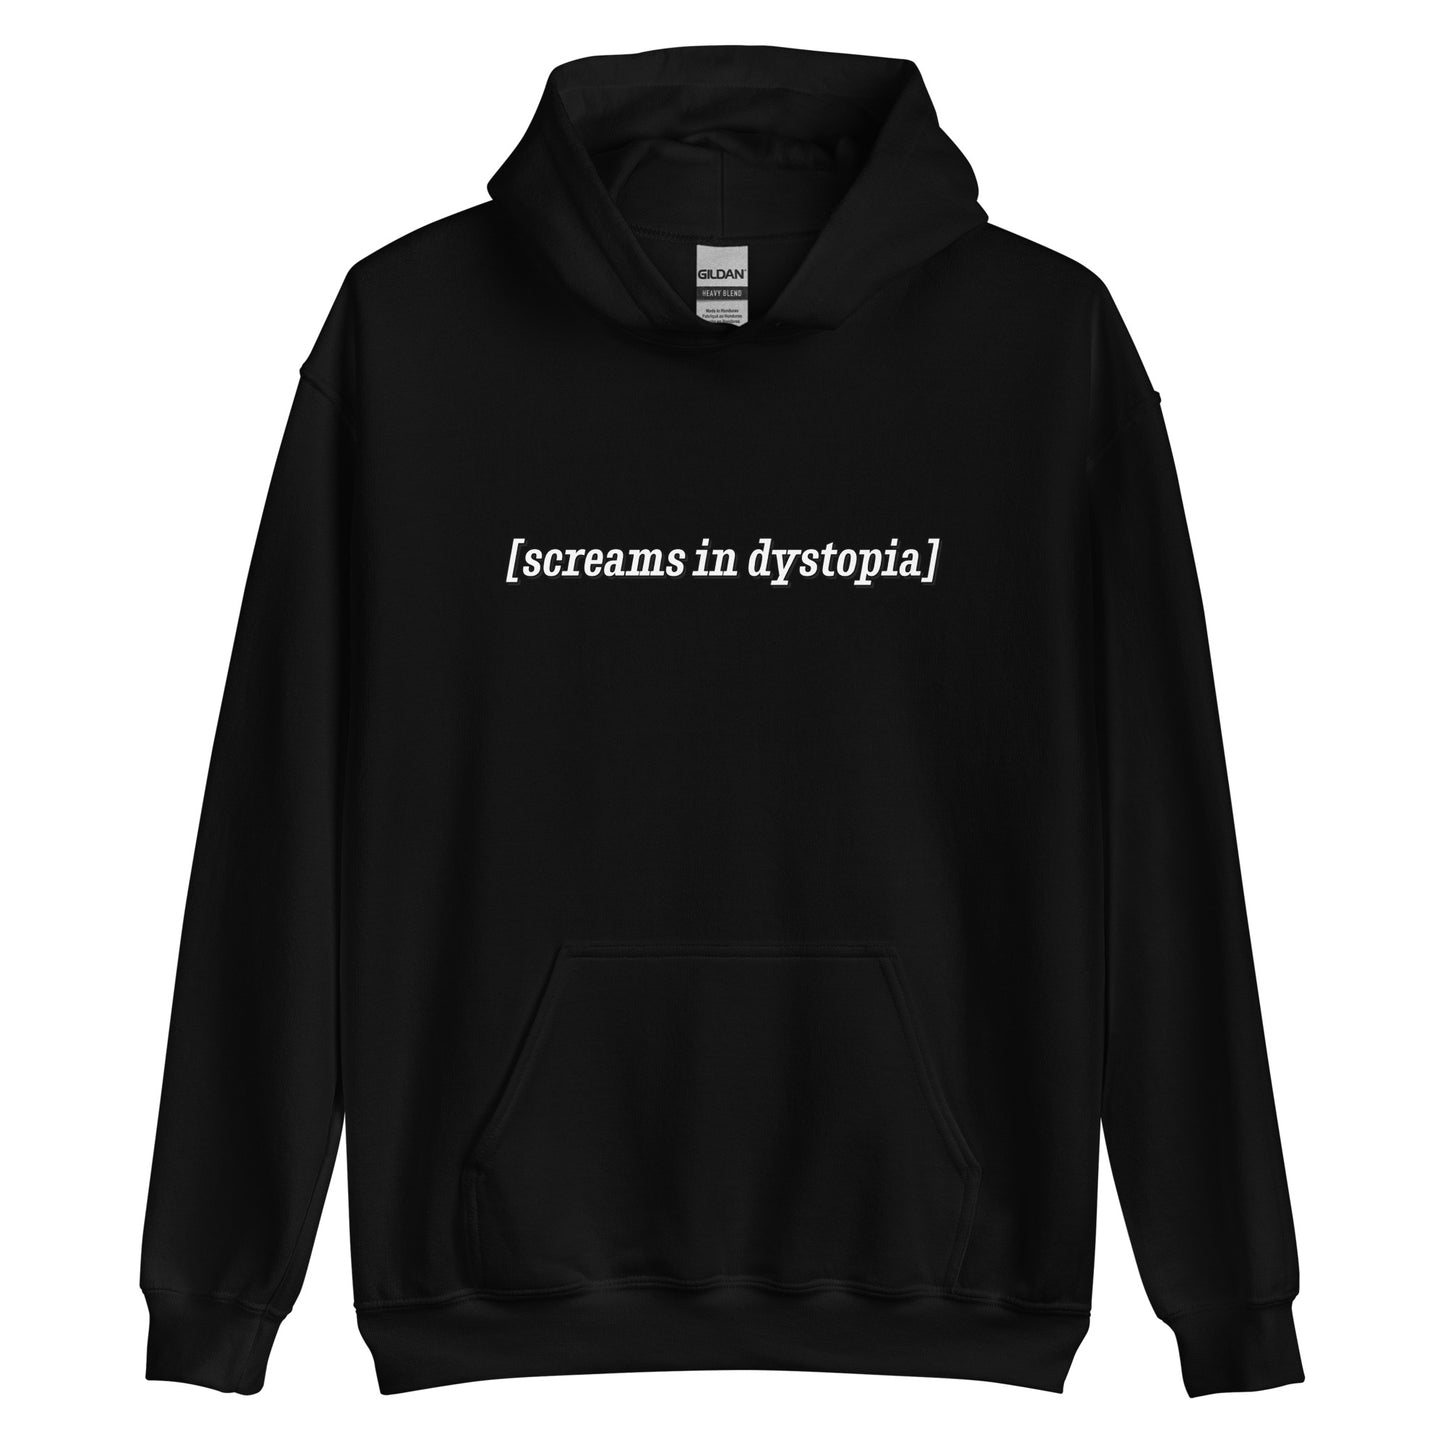 A black hooded sweatshirt with white text in the style of subtitles. The text reads "[screams in dystopia]".